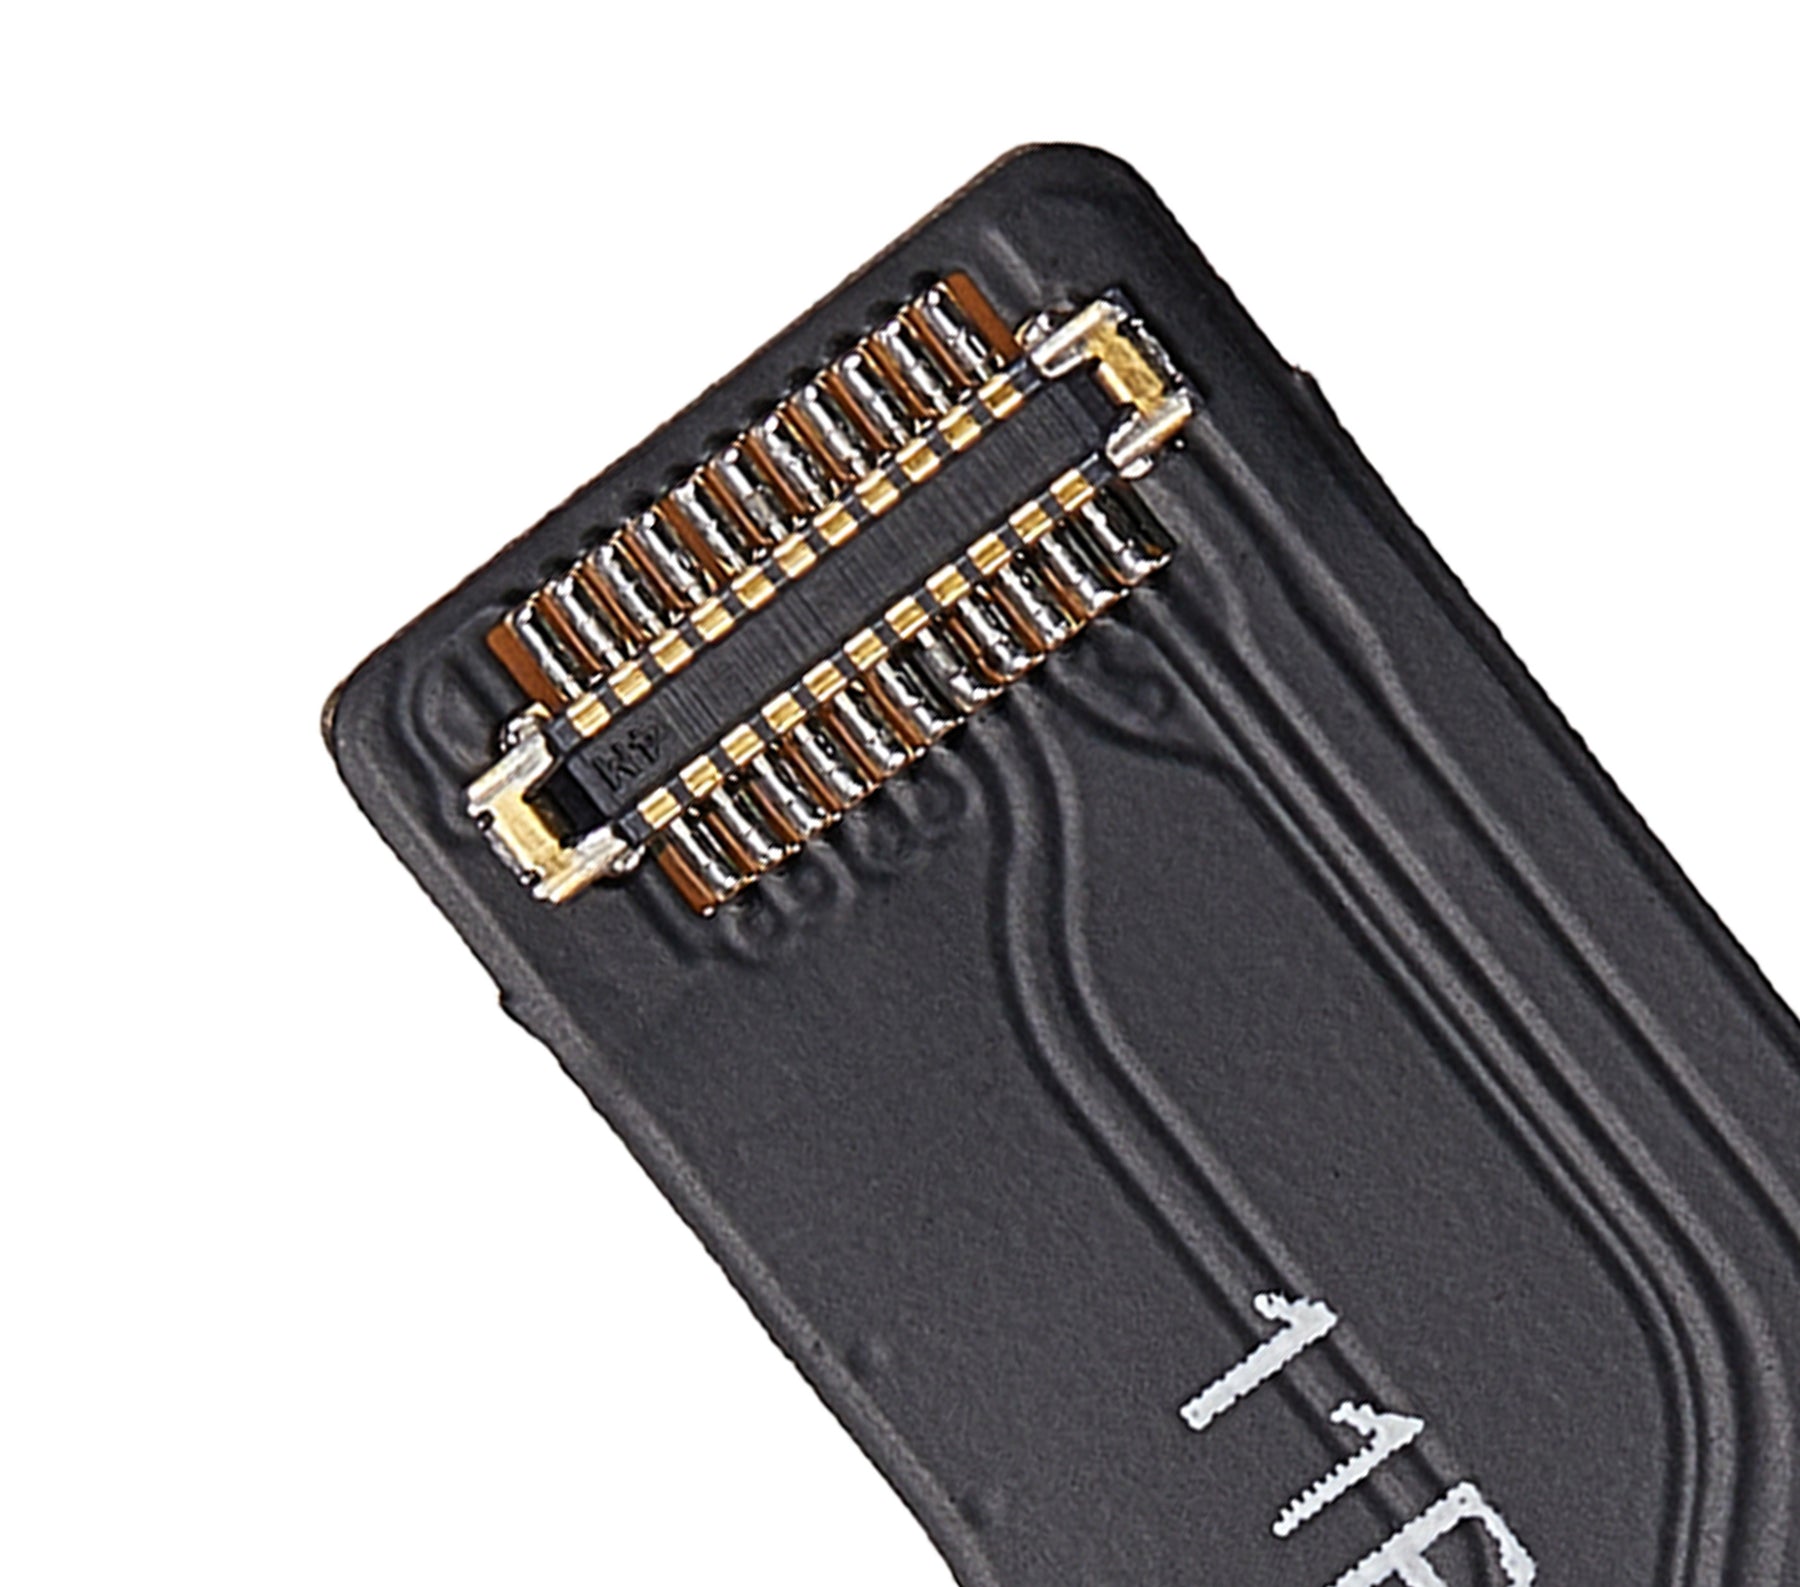 ULTRA WIDE CAMERA FLEX (SOLDERING REQUIRED) COMPATIBLE WITH IPHONE 11 PRO / 11 PRO MAX (J7400)